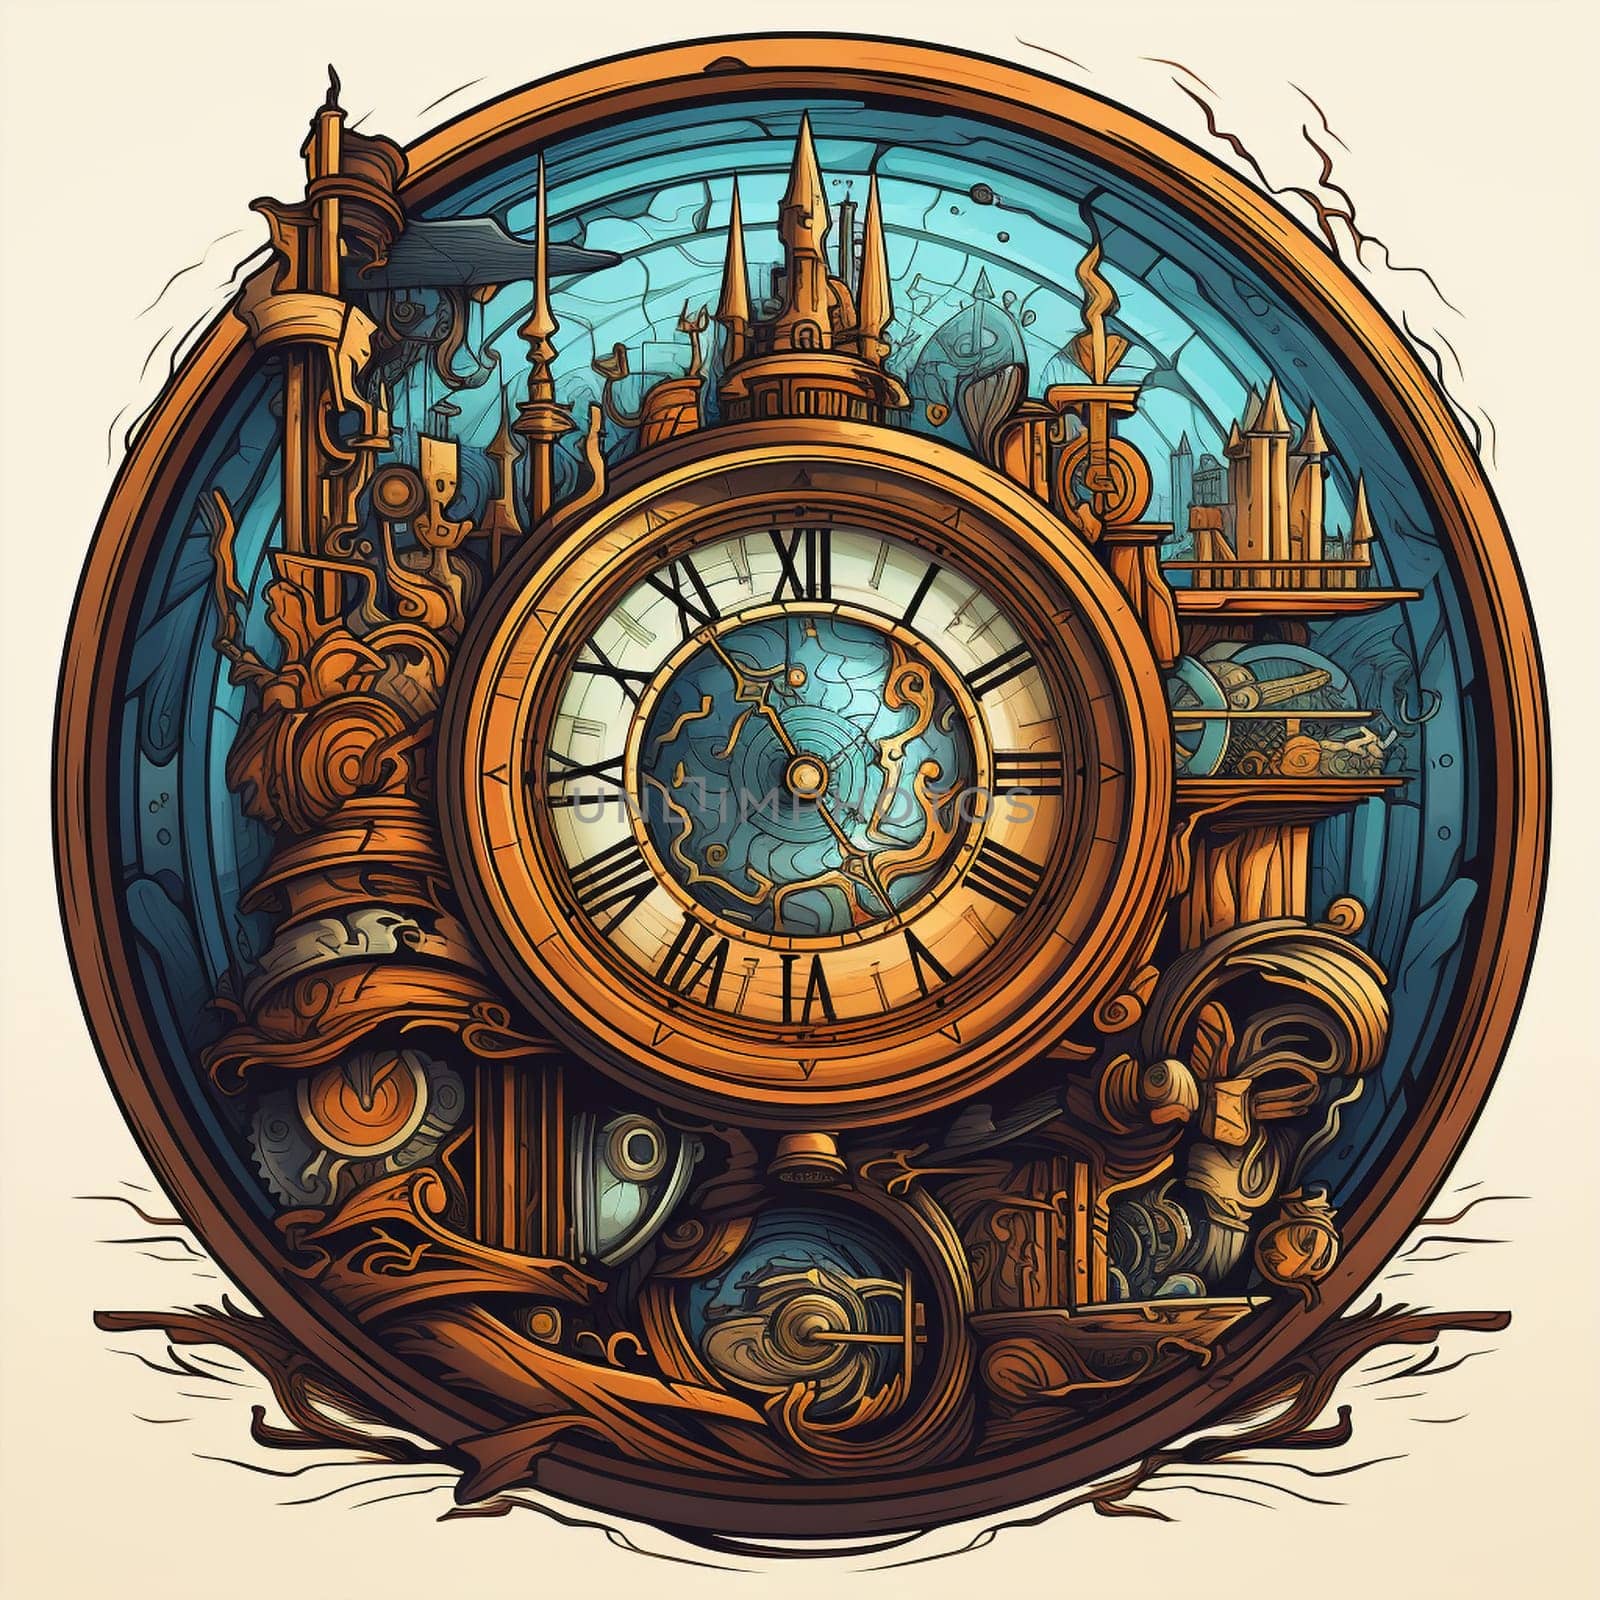 Enter a world of enchantment with this vintage clock, adorned with intricate details and mysterious elements. In a hand-drawn storytelling art style, the clock comes to life with its steam-powered gears and glowing mystical symbols. Surrounding the clock are objects that hint at different tales and stories, with fairies and anthropomorphic animals engaged in peculiar activities nearby. This captivating image evokes curiosity and sparks the imagination, leaving viewers wondering about the enchanting stories hidden within the clock's intricate mechanisms.